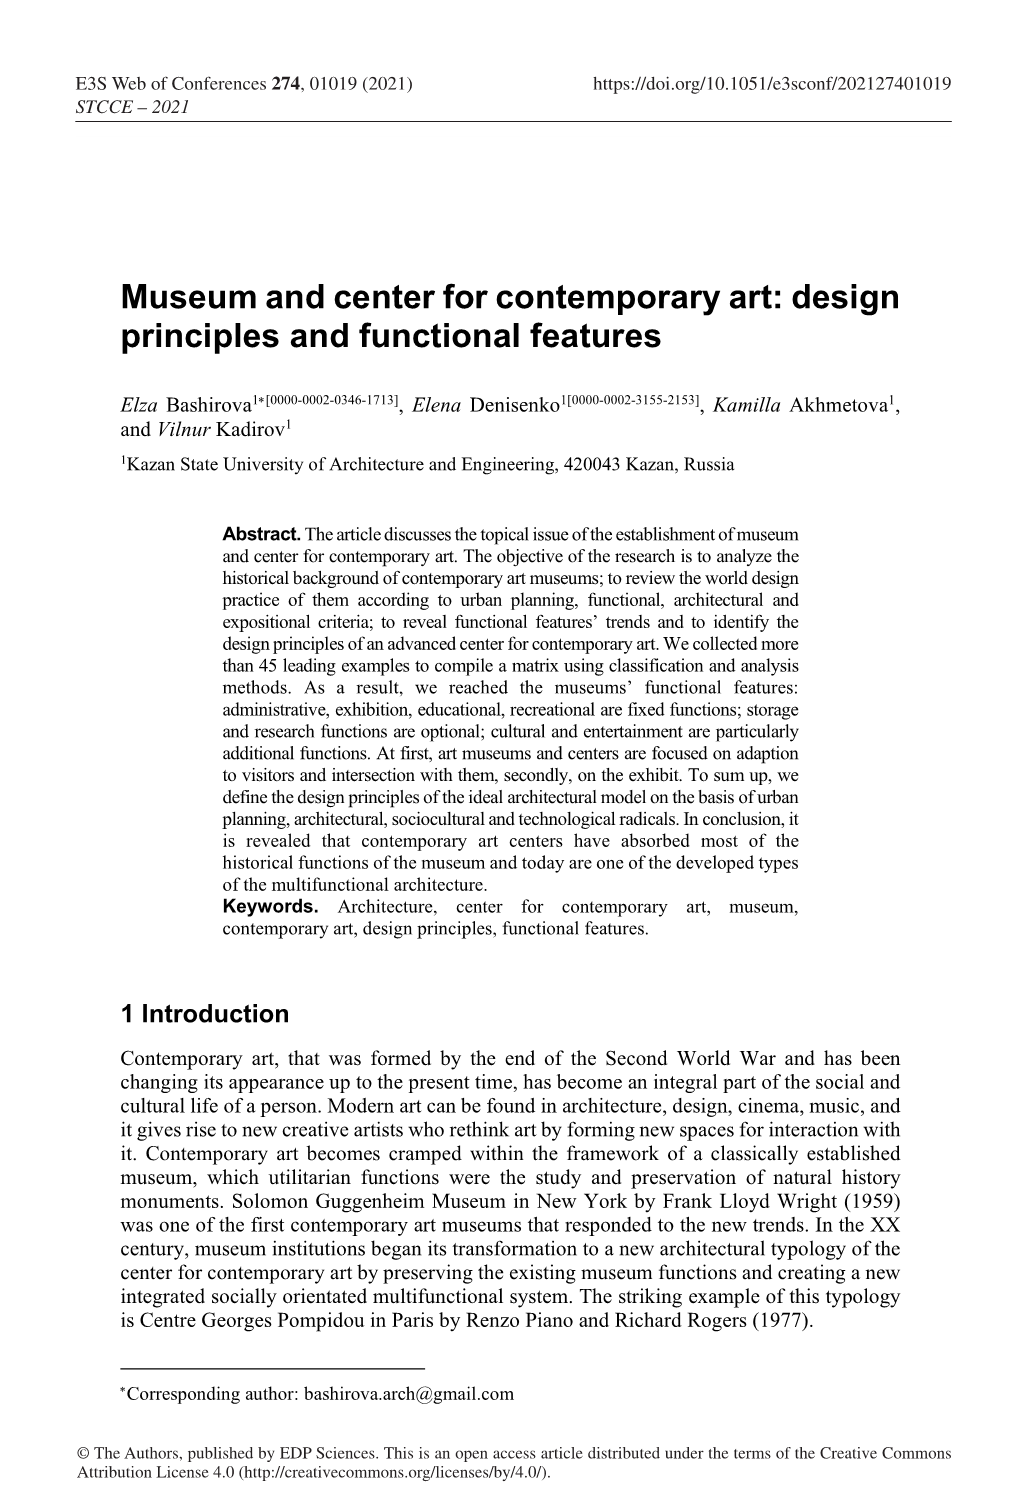 Museum and Center for Contemporary Art: Design Principles and Functional Features